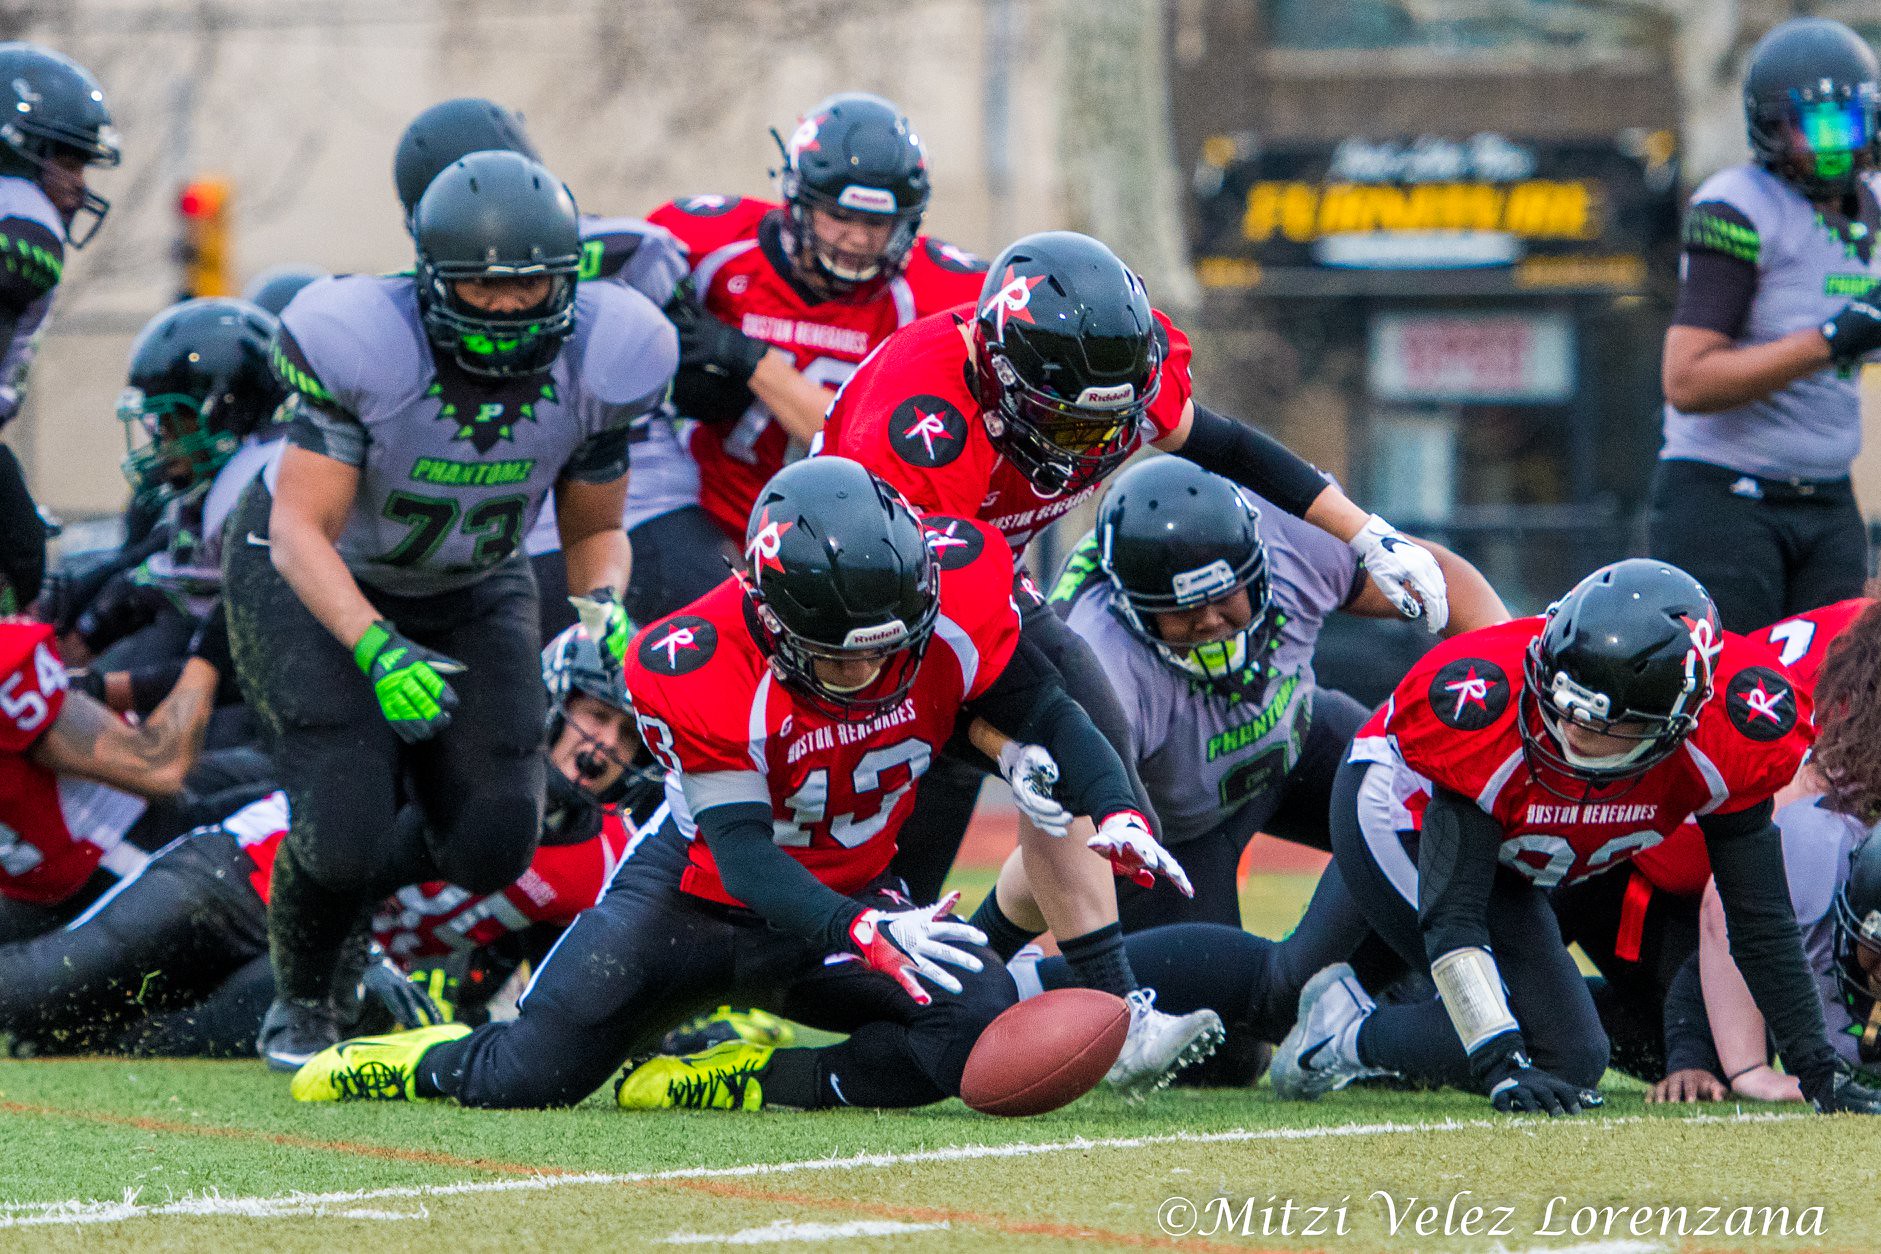 Mocha Torres of the Boston Renegades recovers a fumble